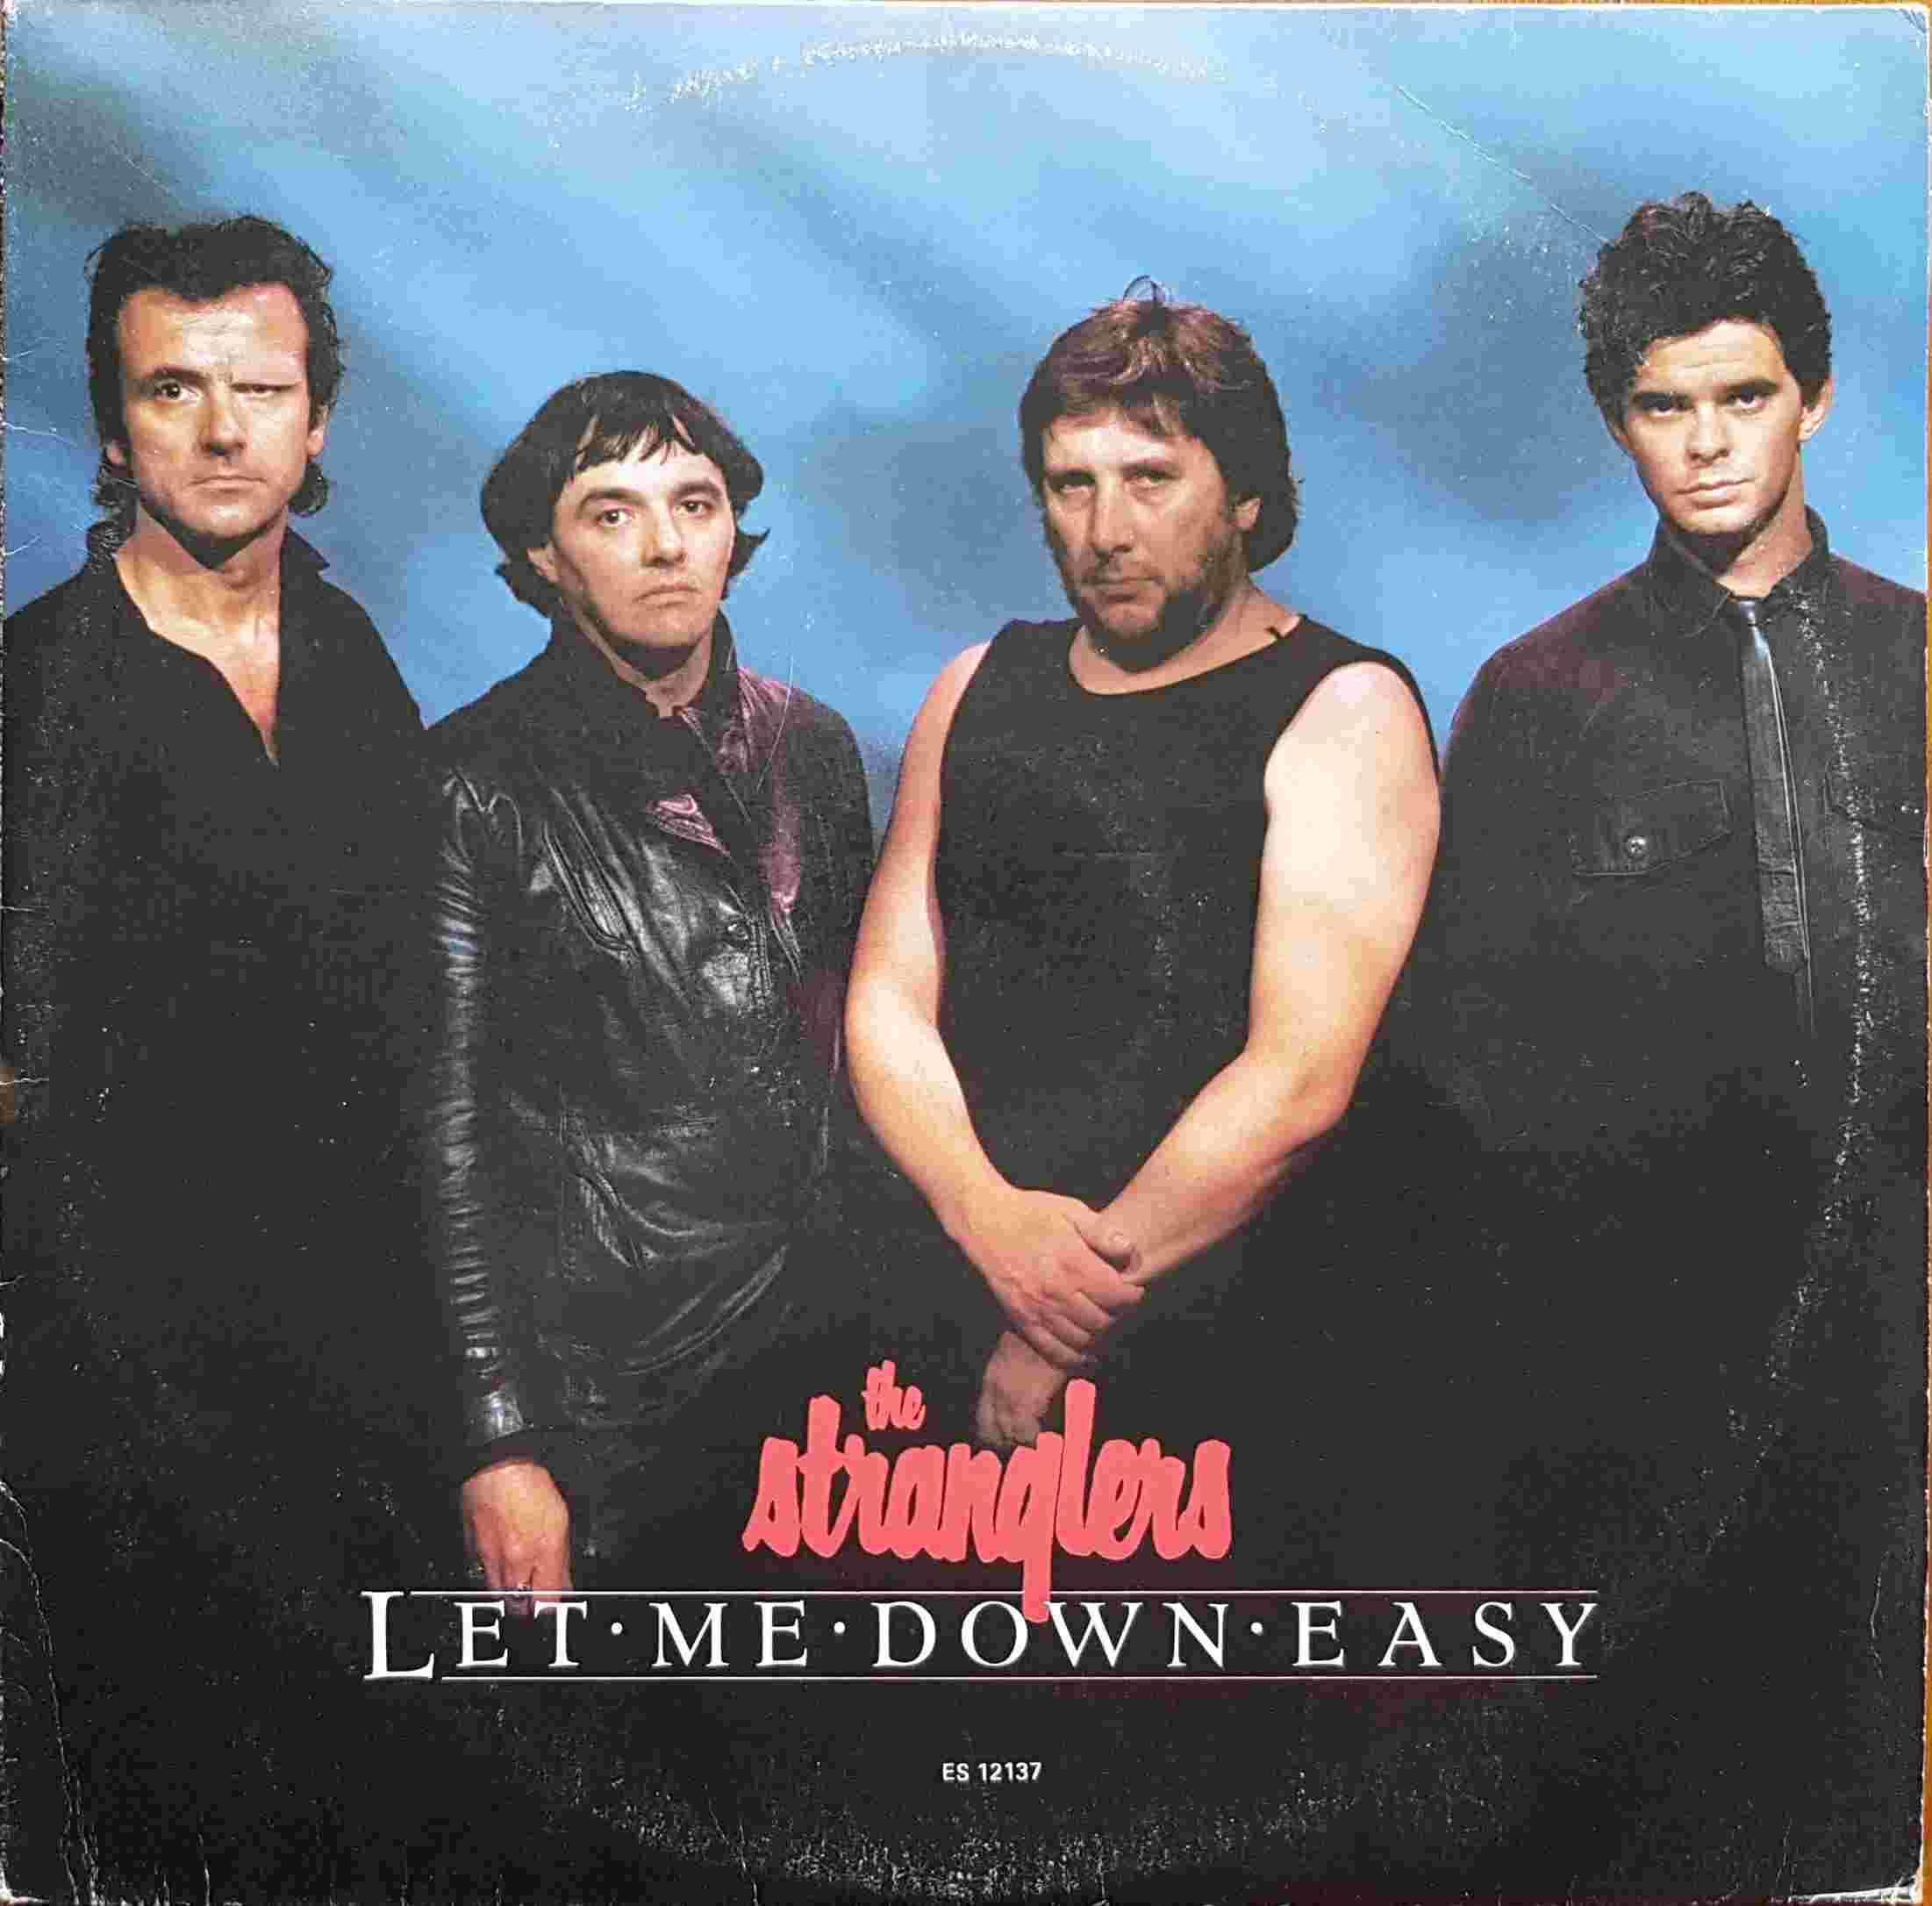 Picture of ES 12137 Let me down easy by artist The Stranglers from The Stranglers